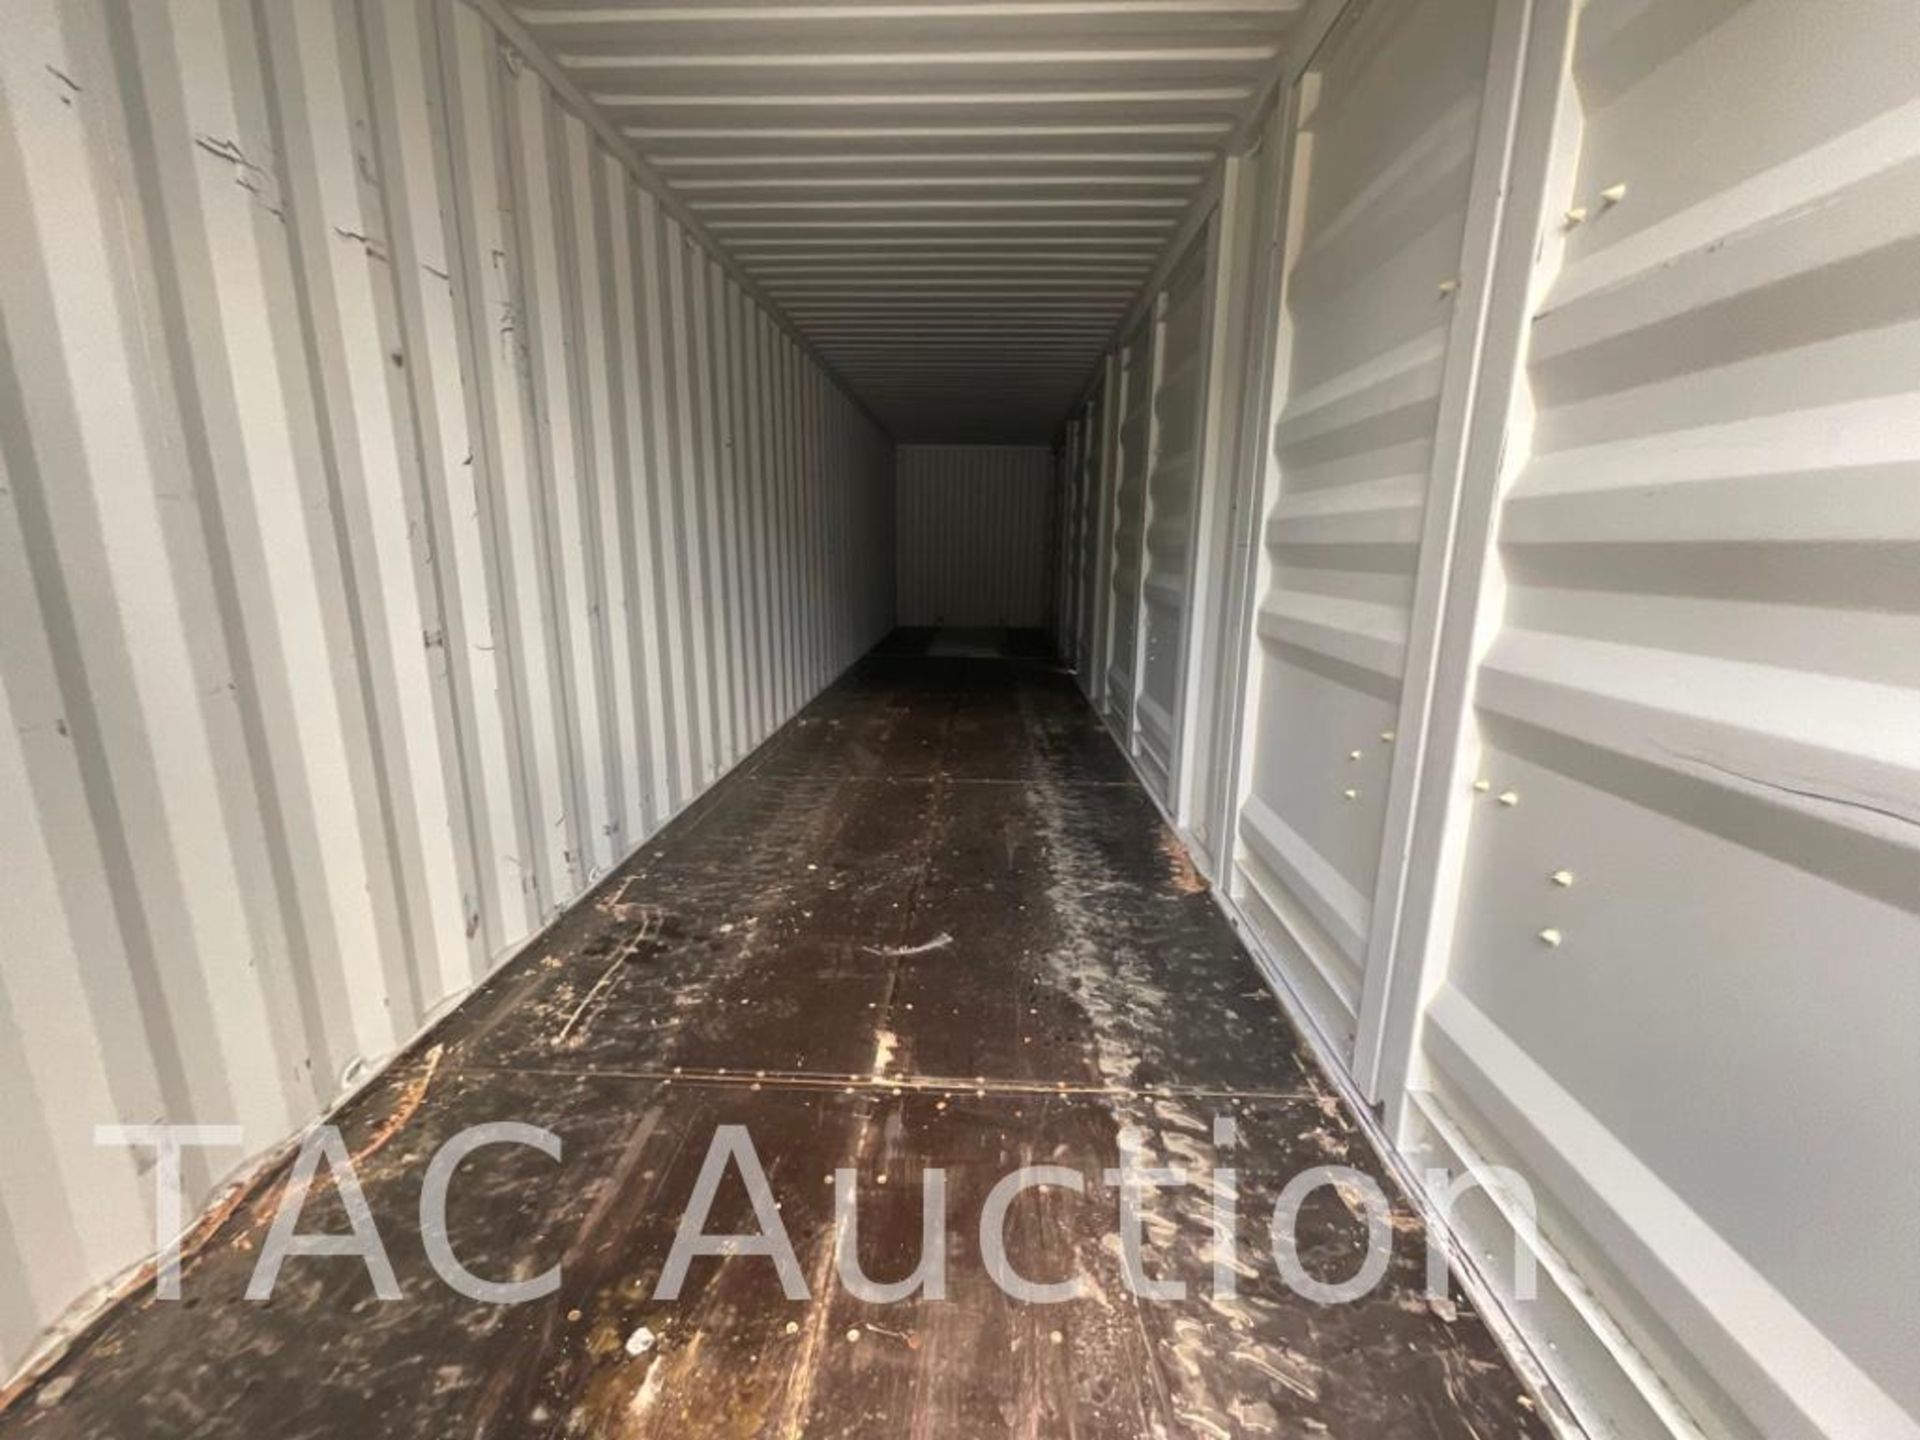 2023 40ft Hi-Cube Shipping Container - Image 8 of 11